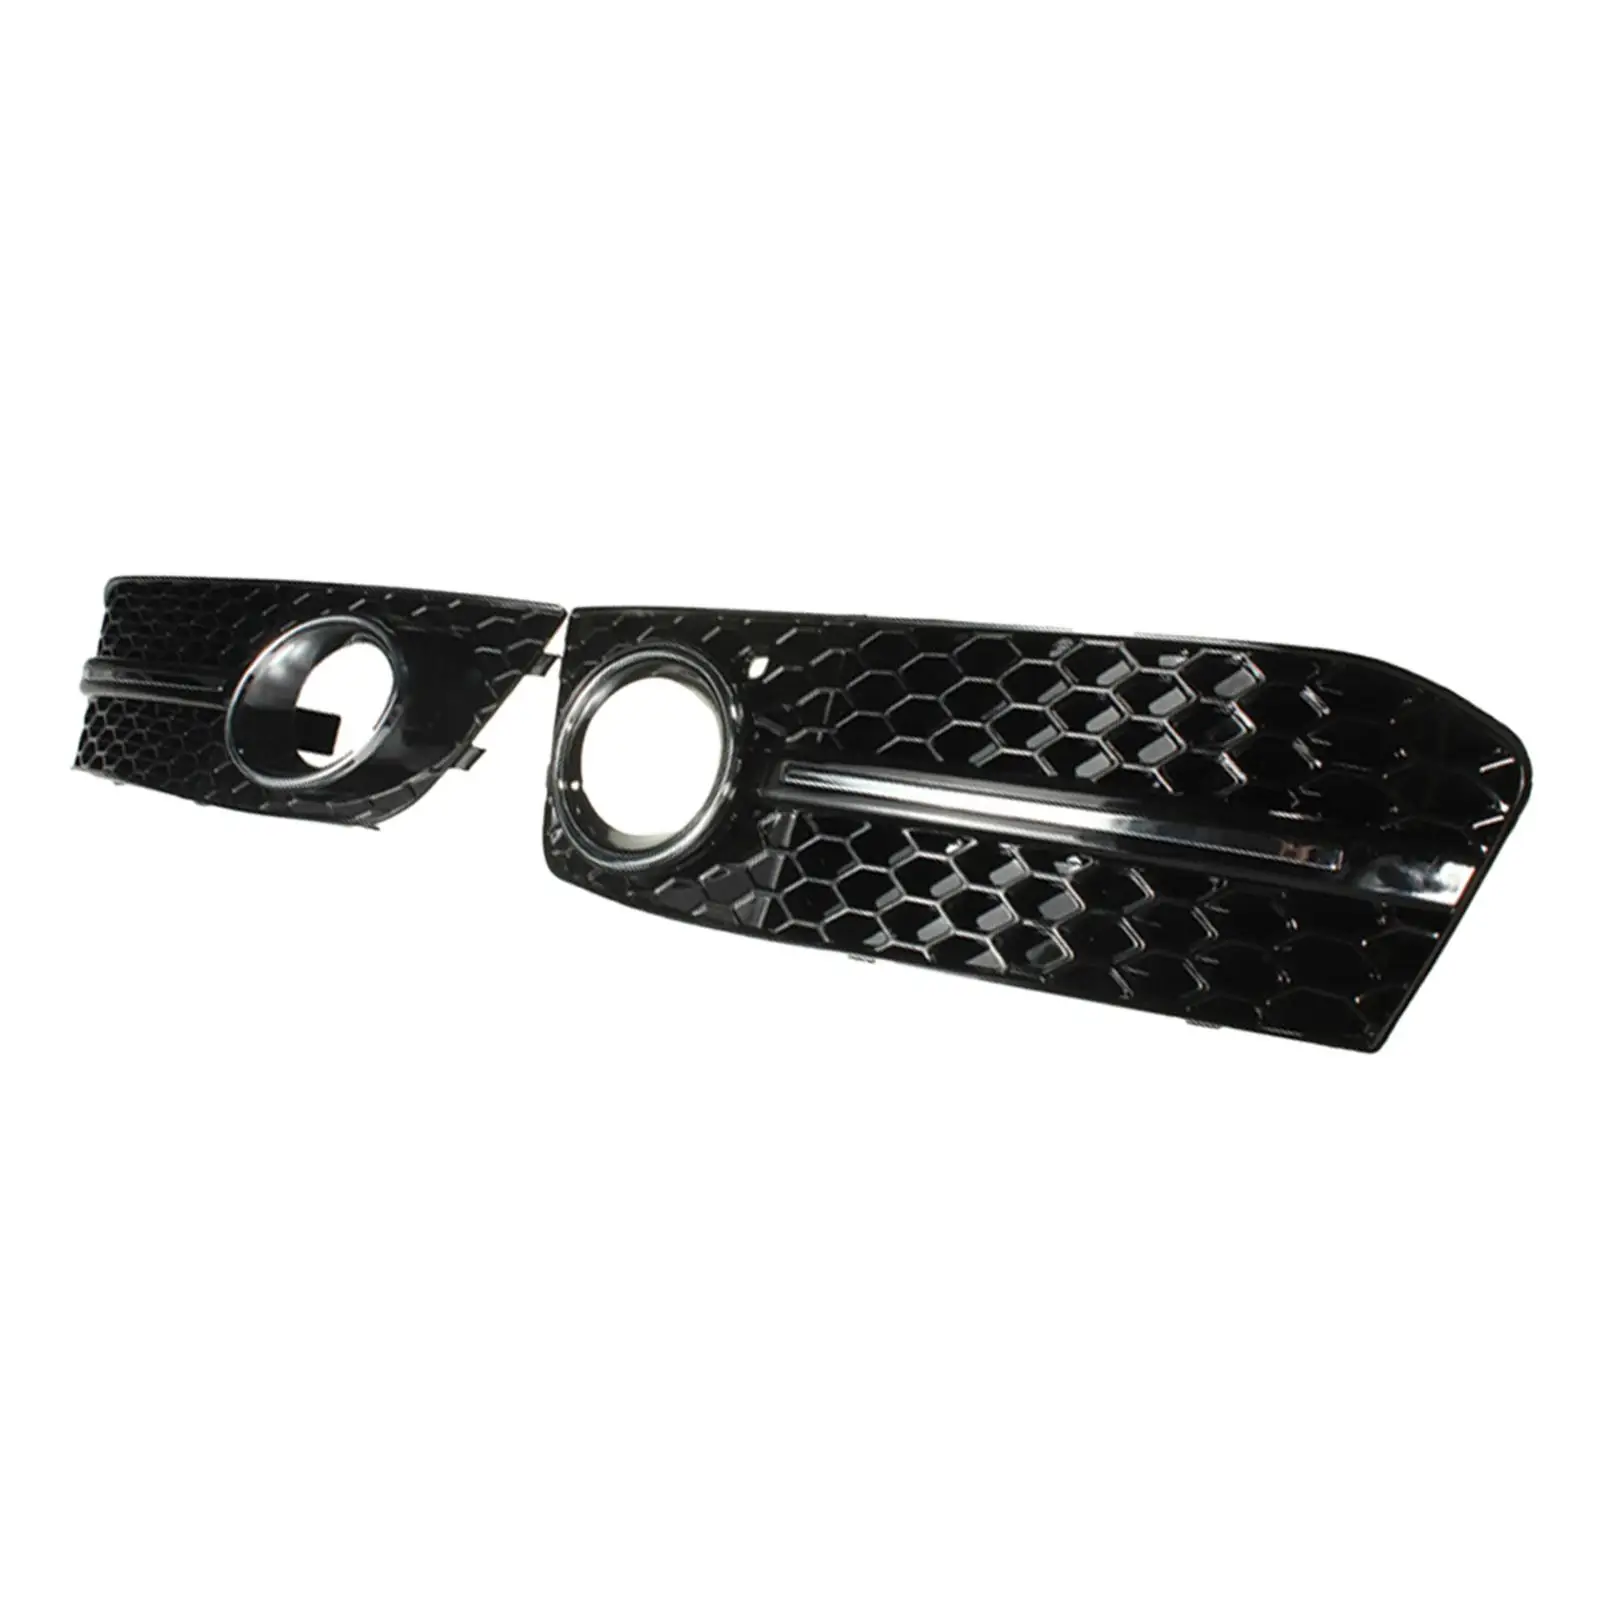 2Pcs Automotive Fog Light Cover Grille/ 8K0807681 Glossy Black Left Right Honeycomb for A4 B8 Easy Installation Replacement/